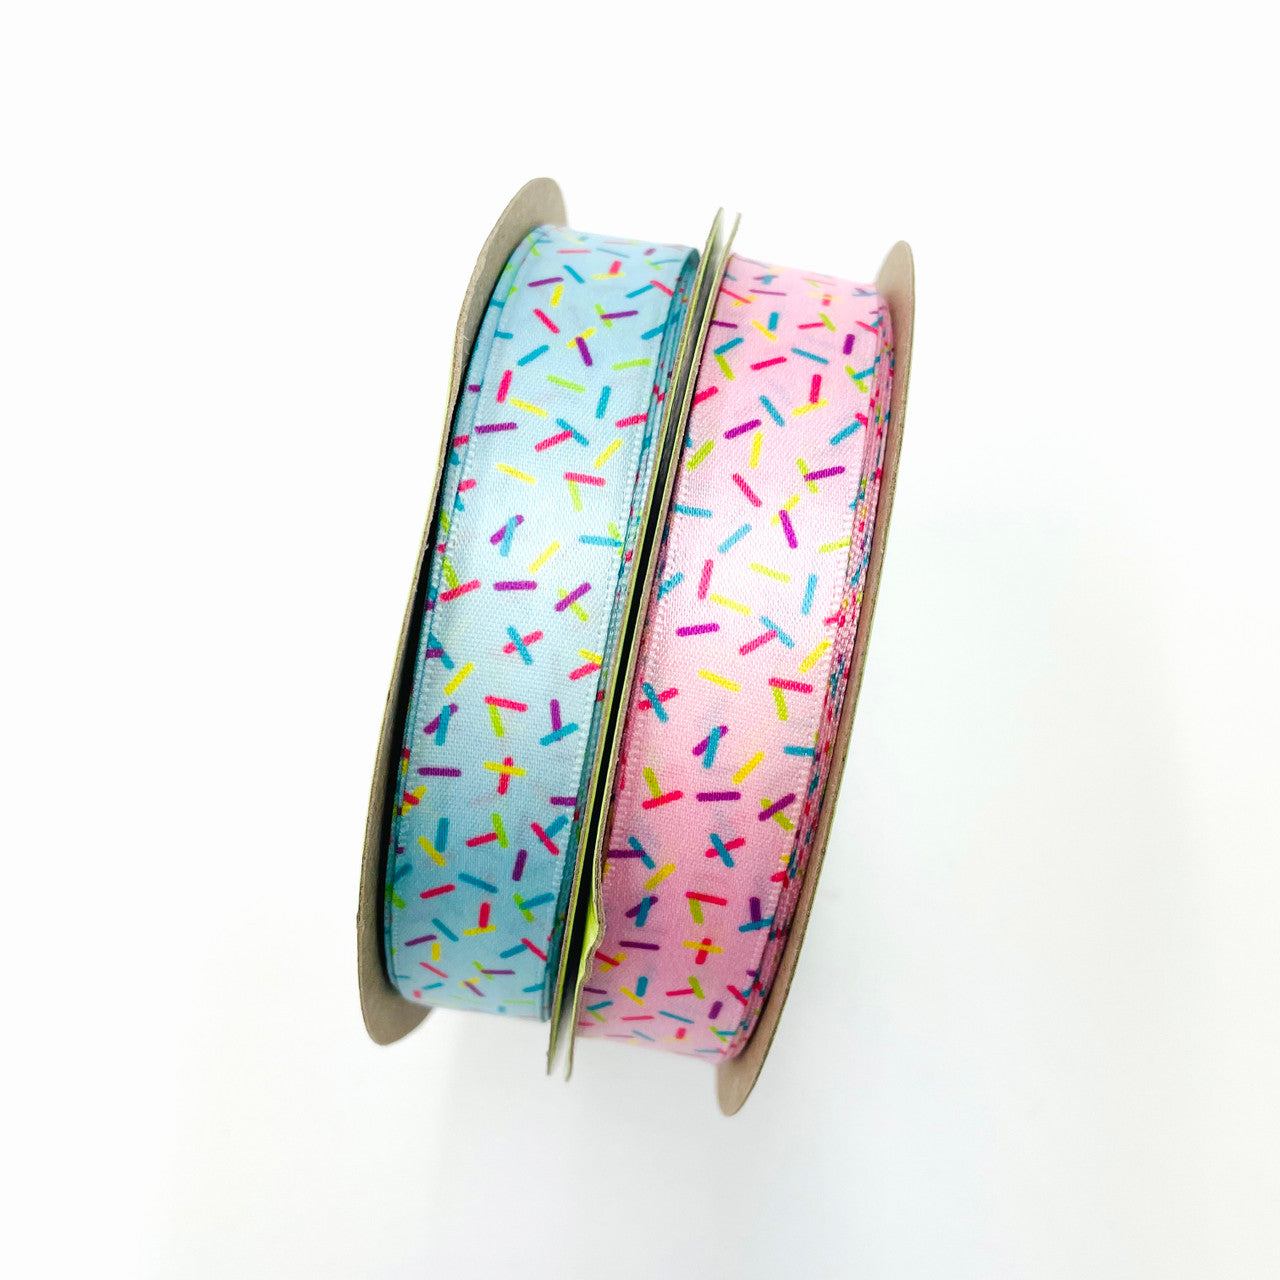 Sprinkles ribbon sprinkles in rainbow colors on a blue or pink background printed on 5/8" white single face satin,